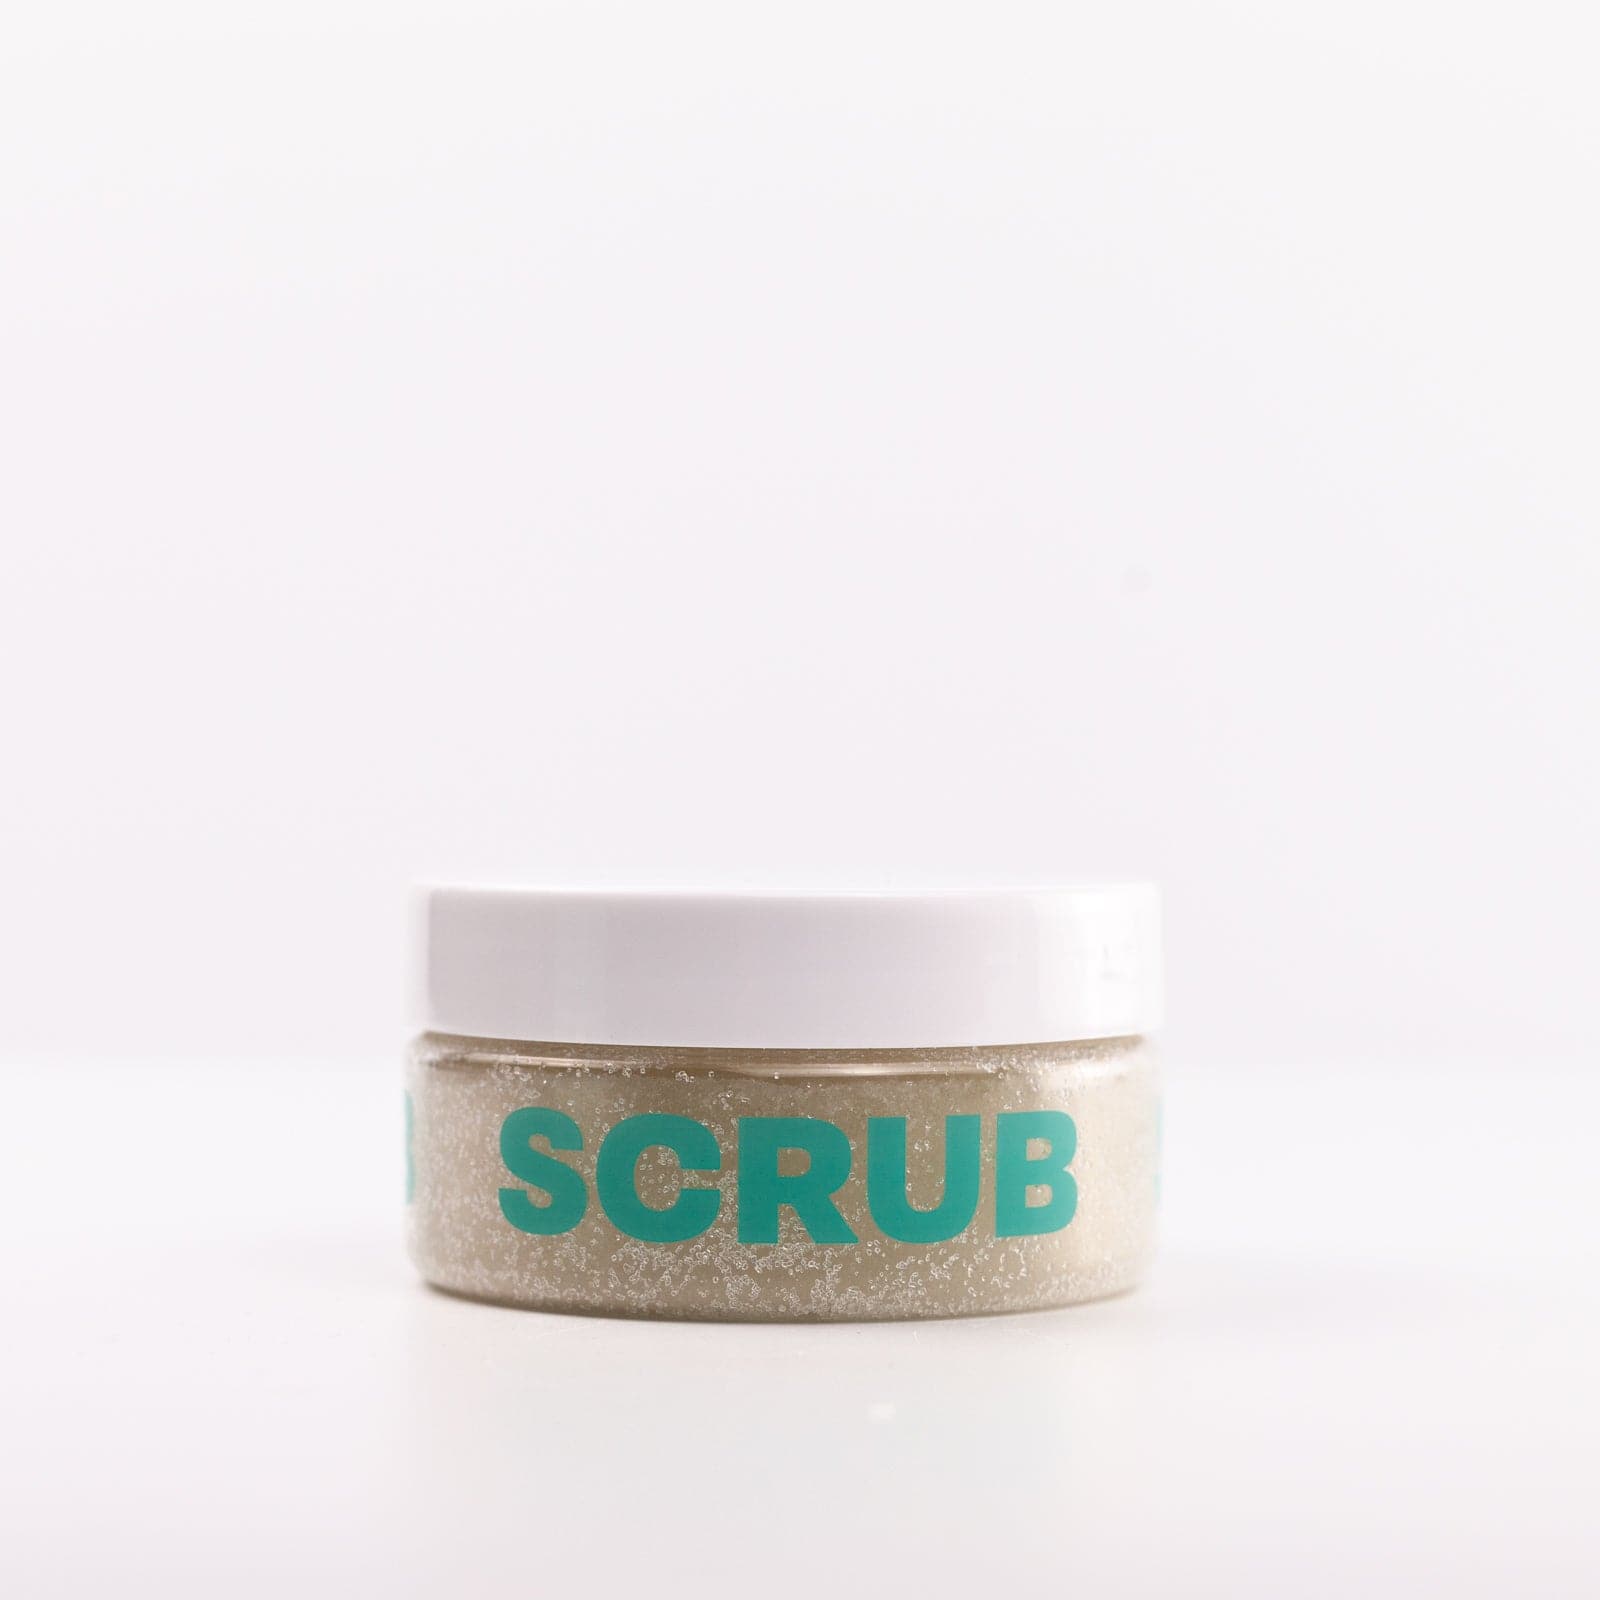 Clear Body Scrub container with white lid and teal lettering against white background